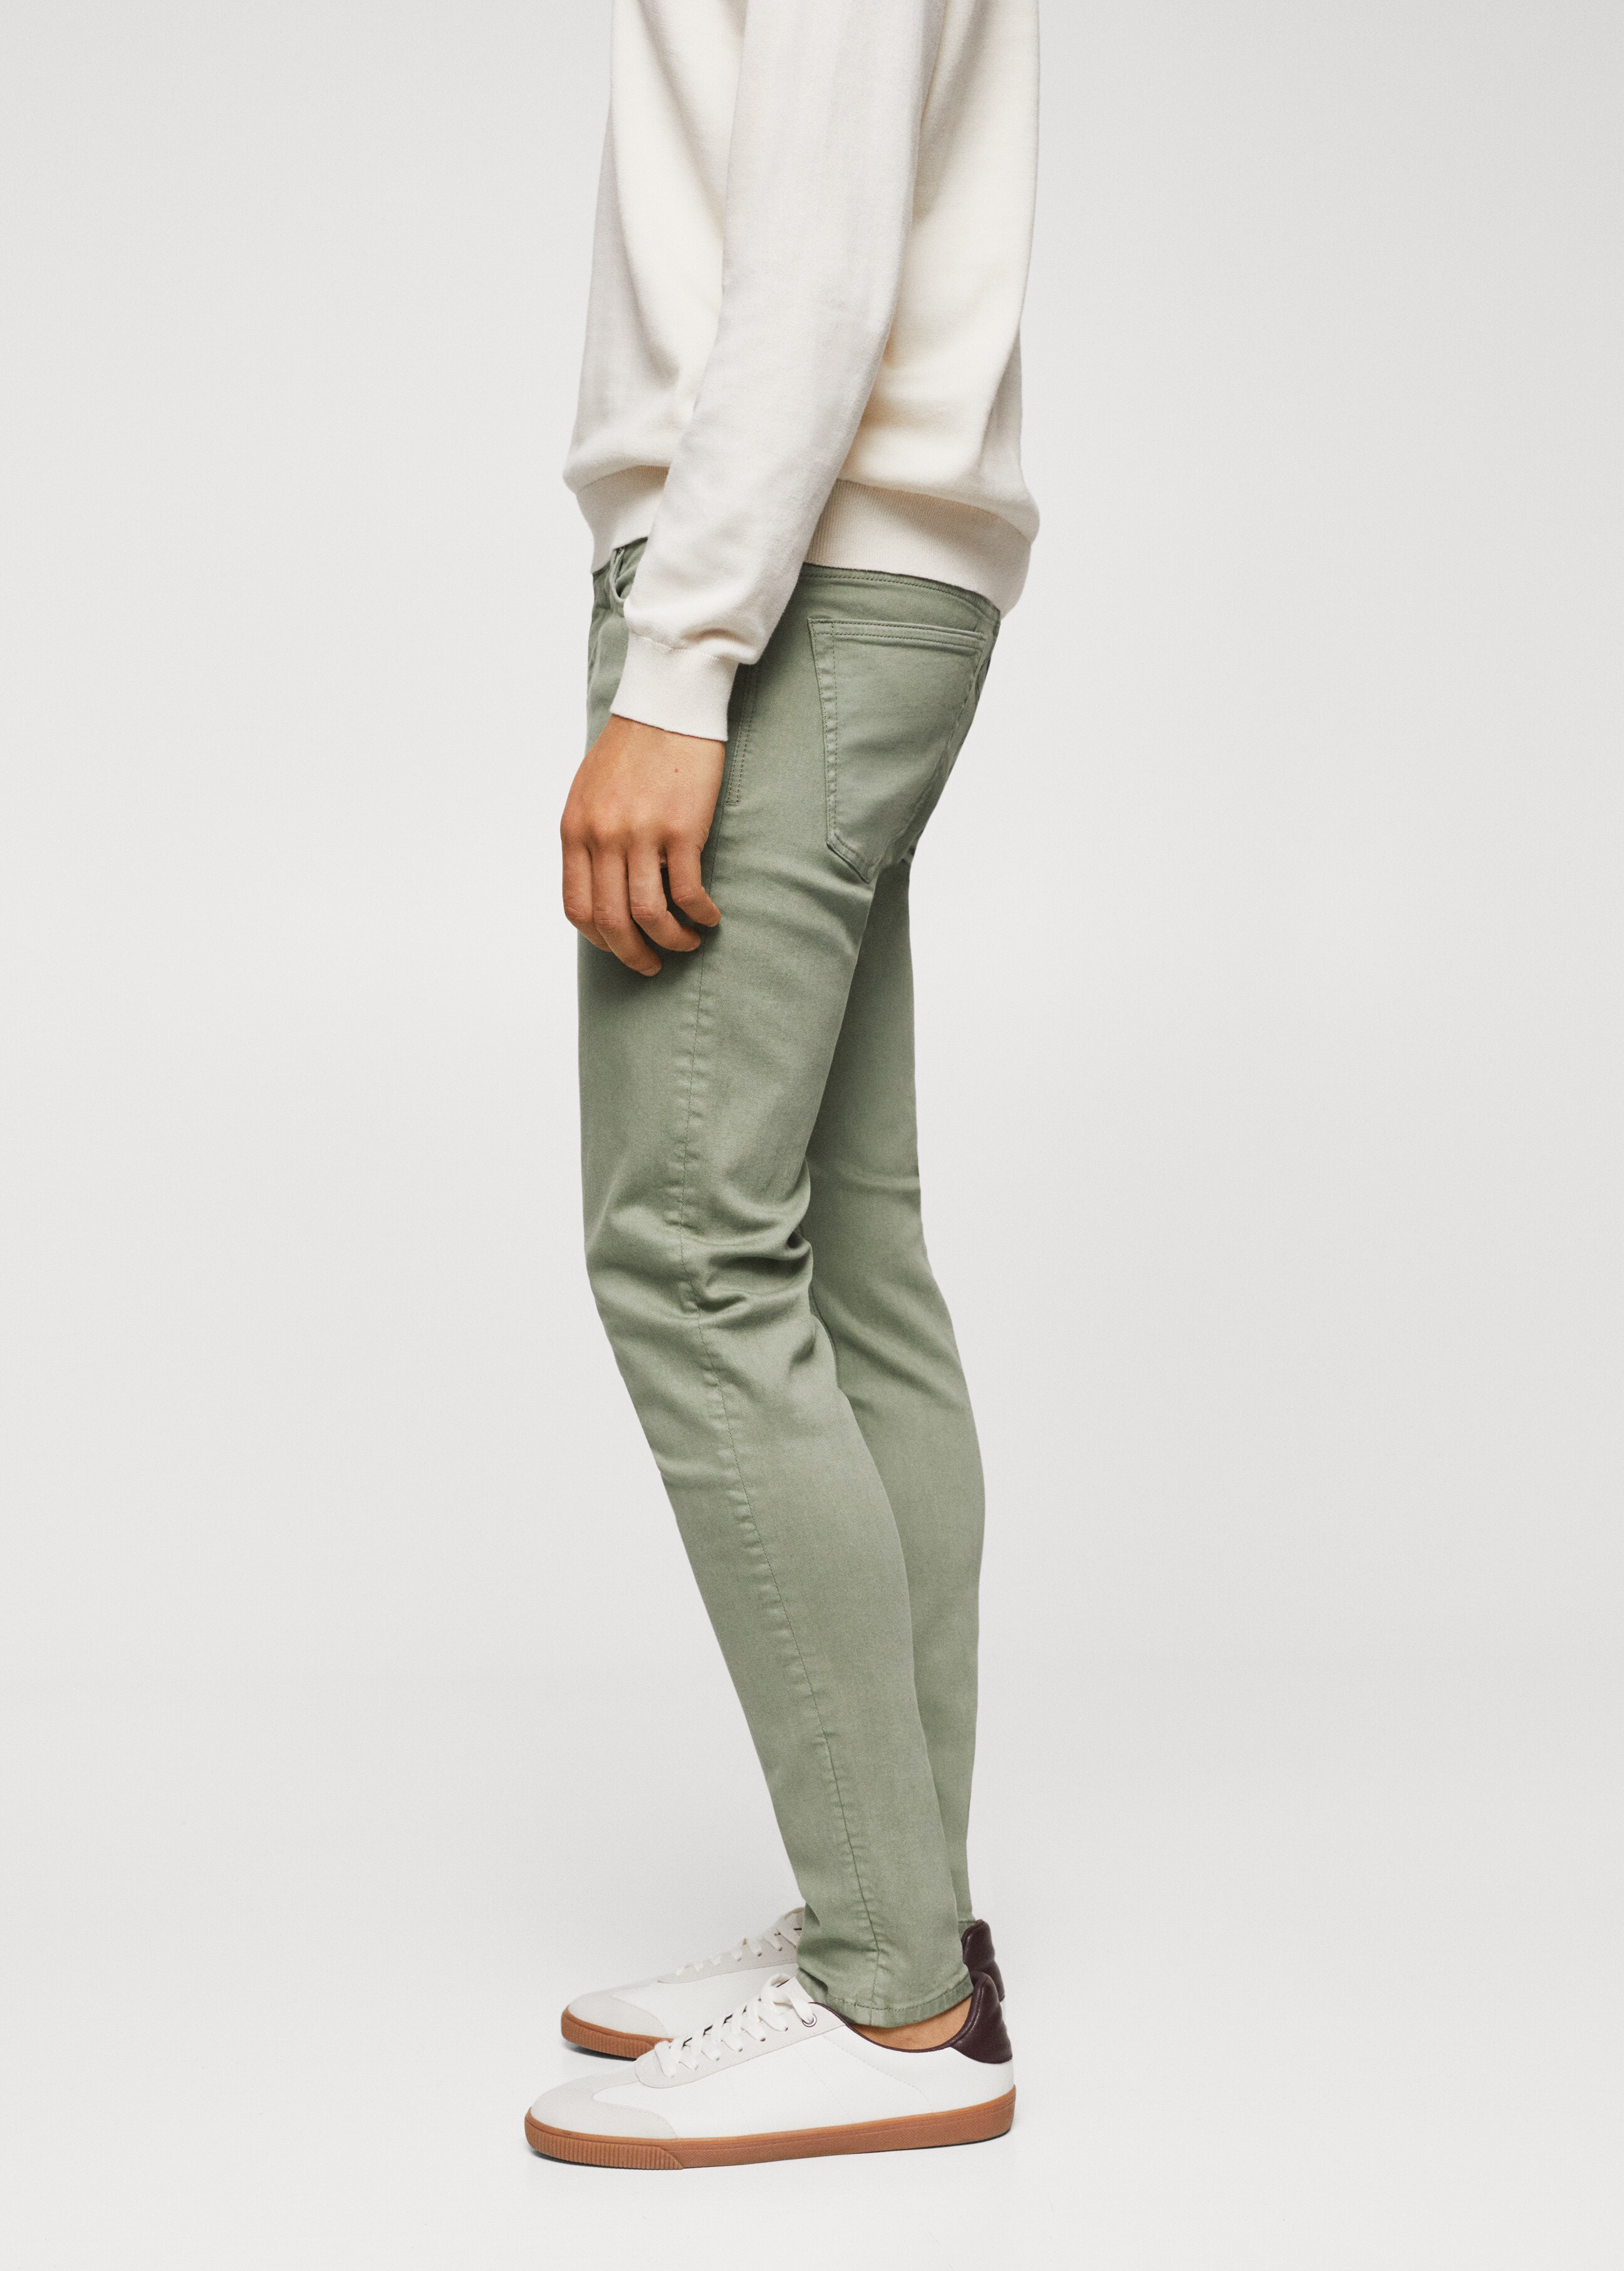 Colour skinny jeans - Details of the article 2